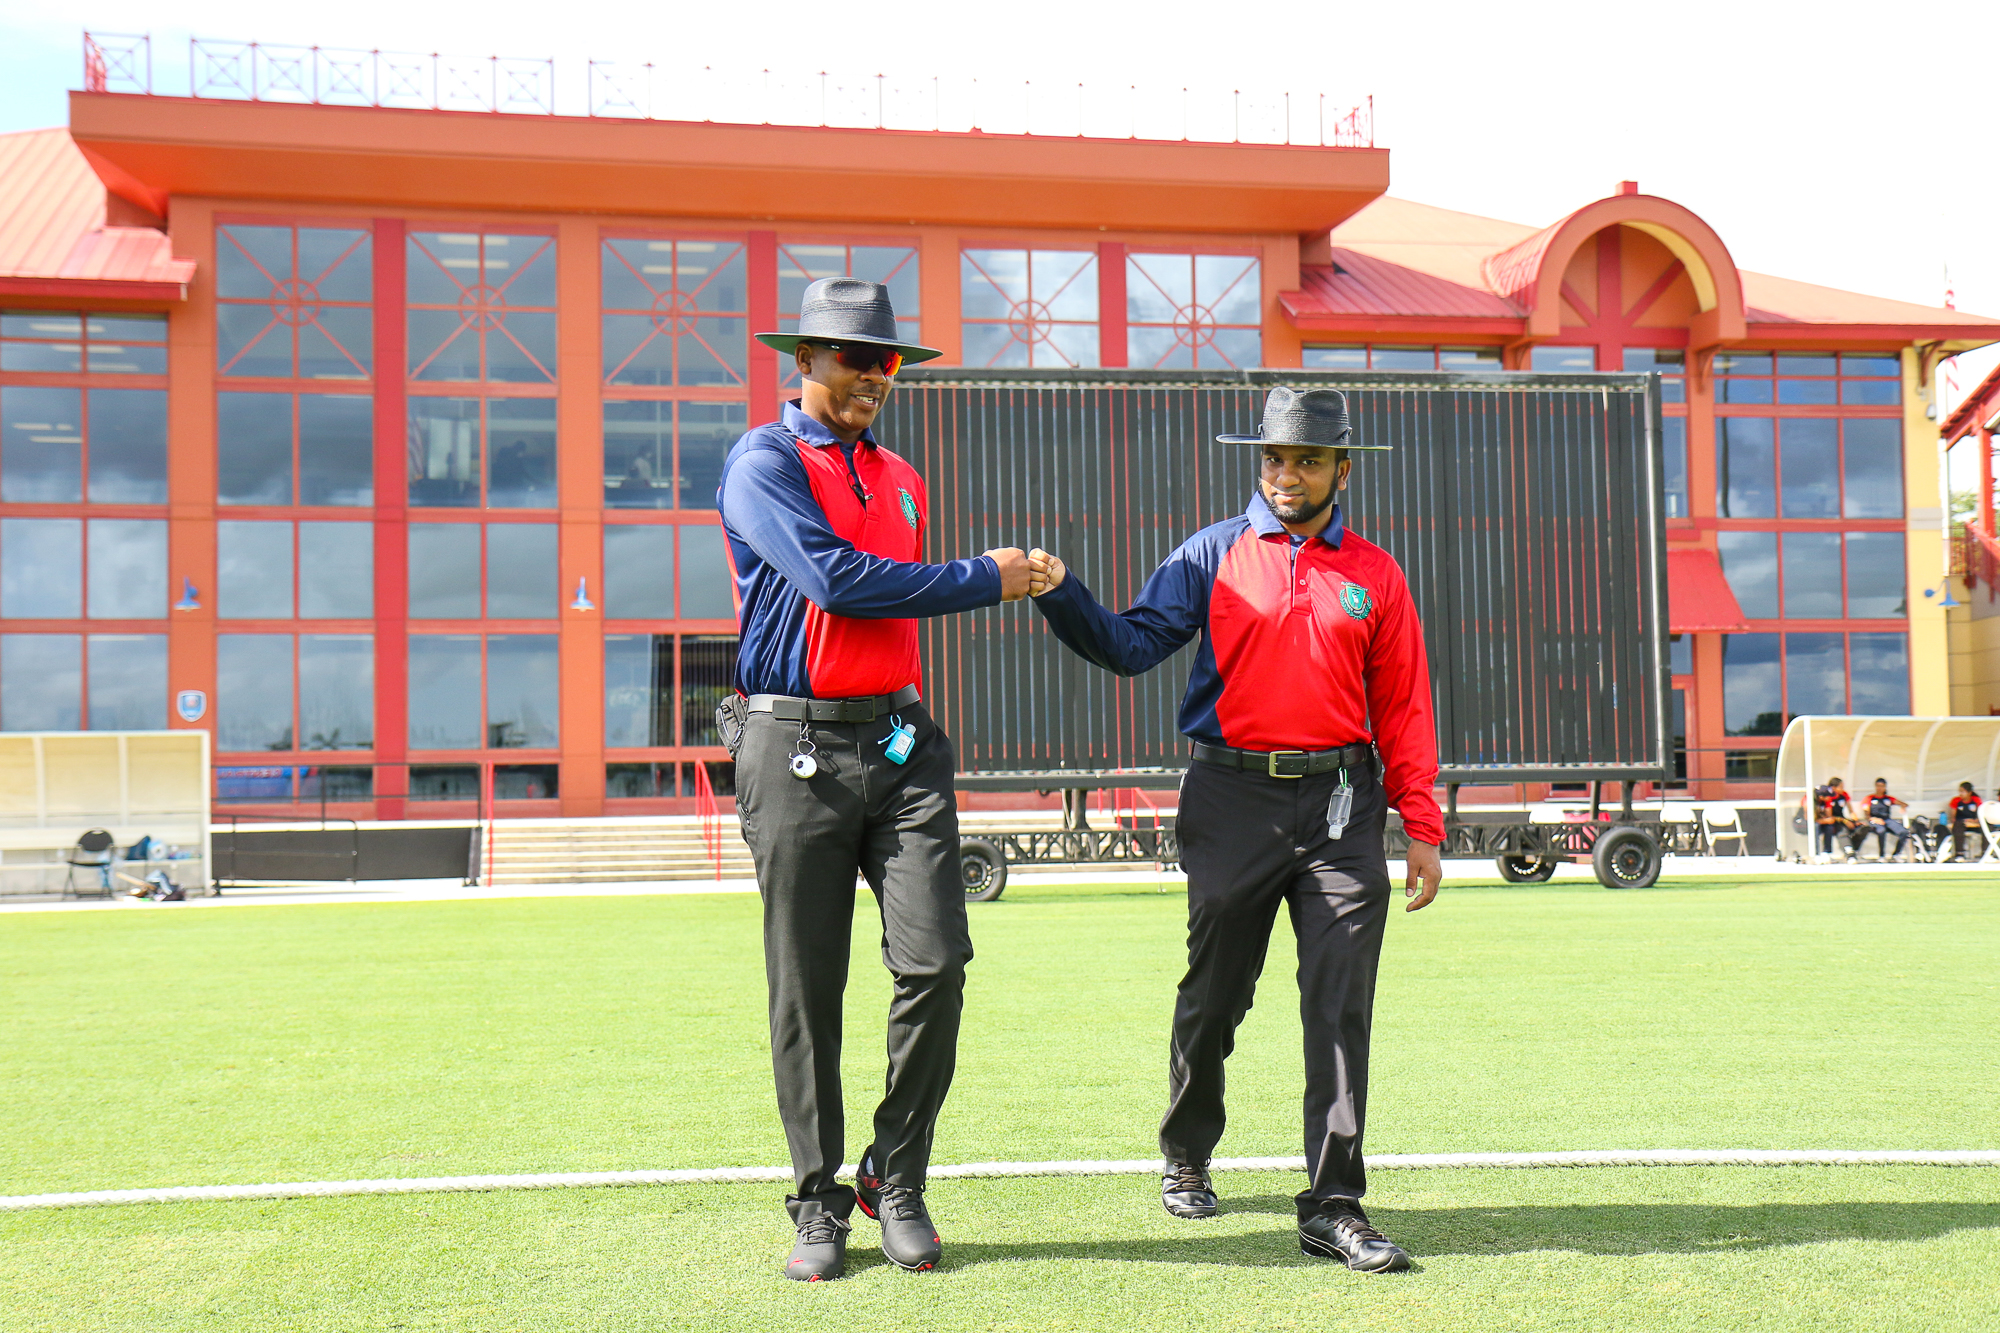 USA Cricket Encouraged by Interest & Engagement in Level 1 Umpires Course